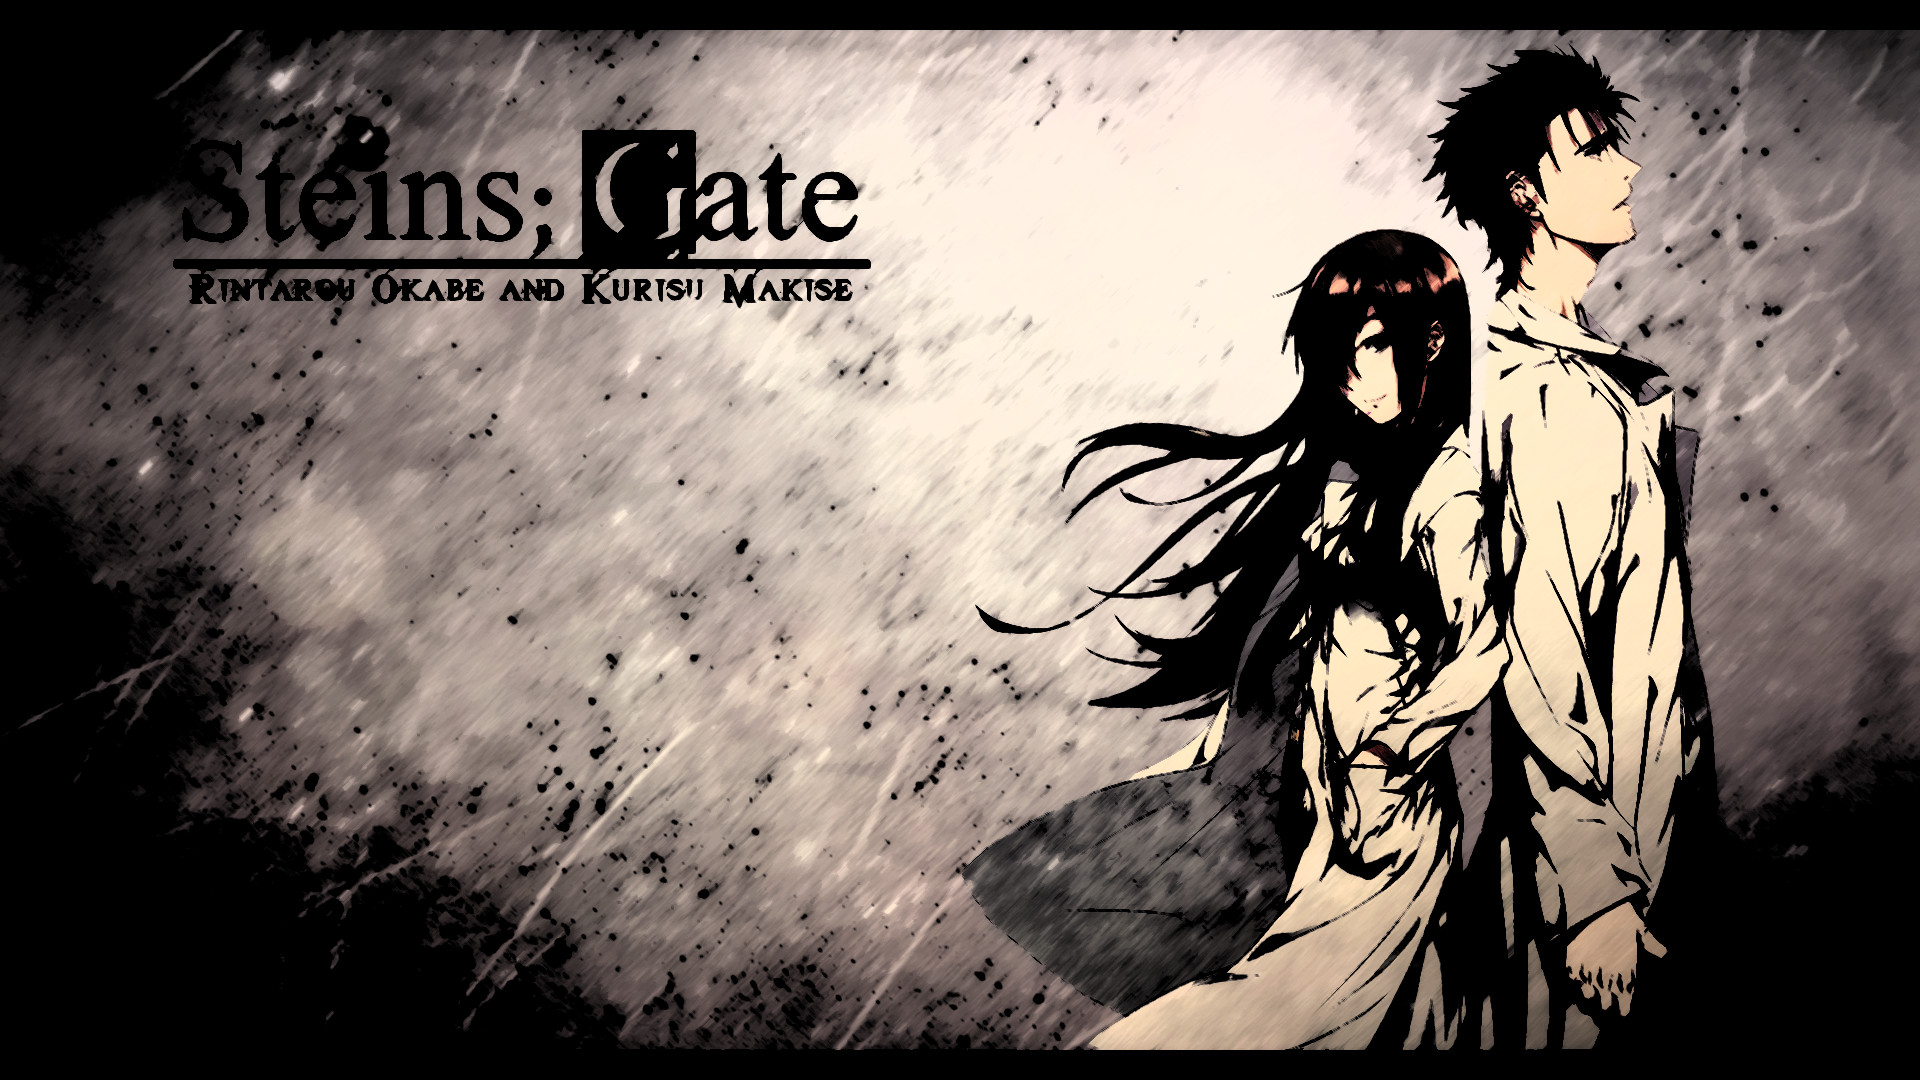 HD Wallpaper Background ID326271. Anime SteinsGate